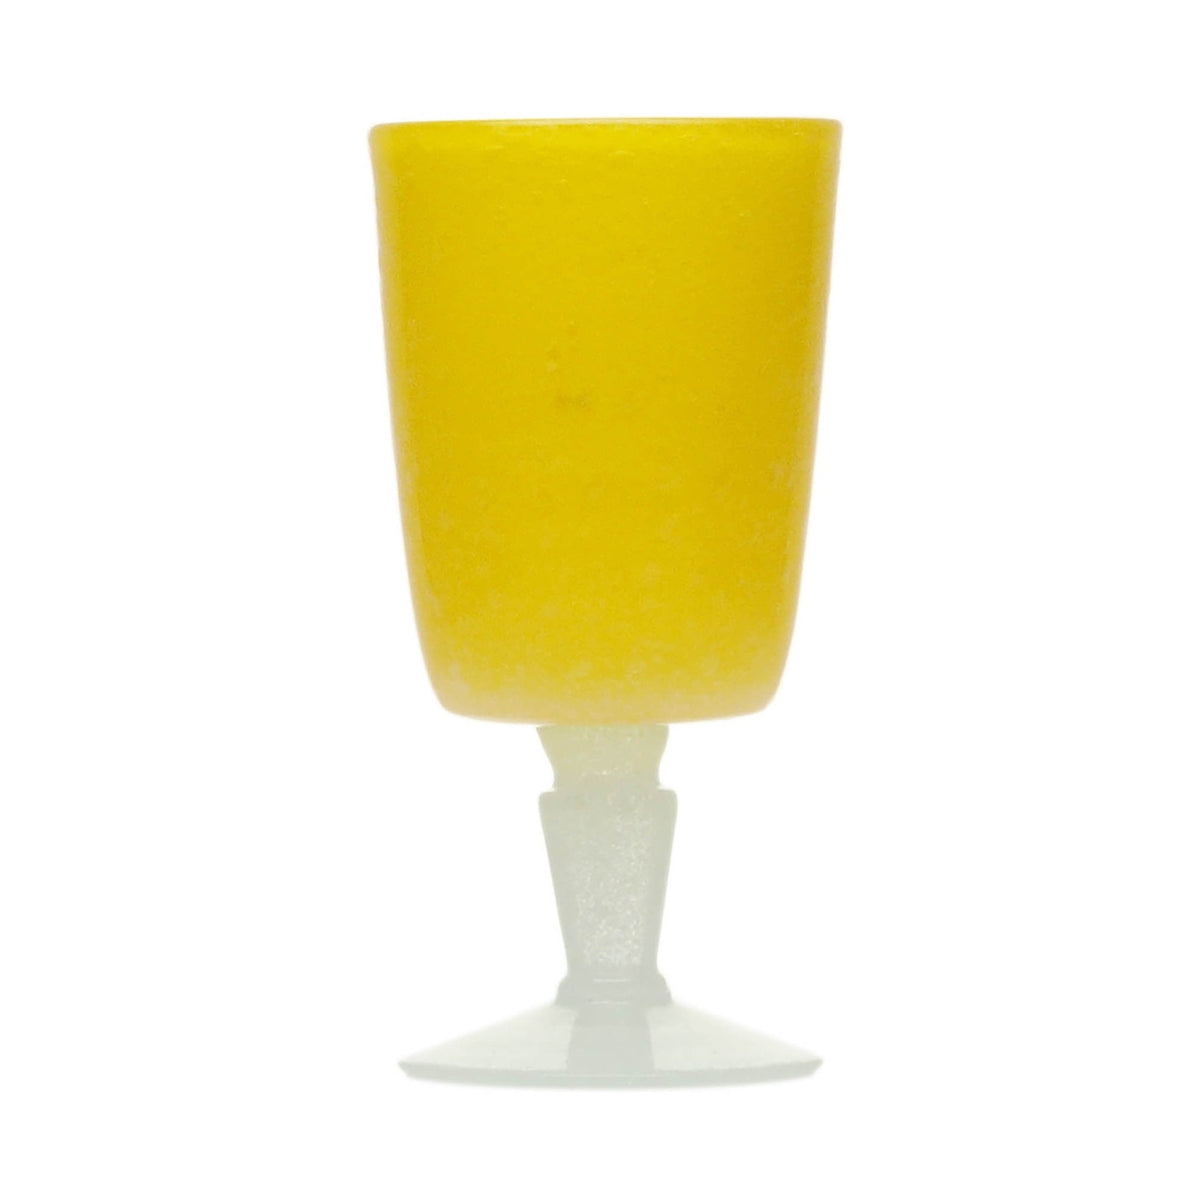 Yellow Solid Wine Goblet from Memento Glassware. 